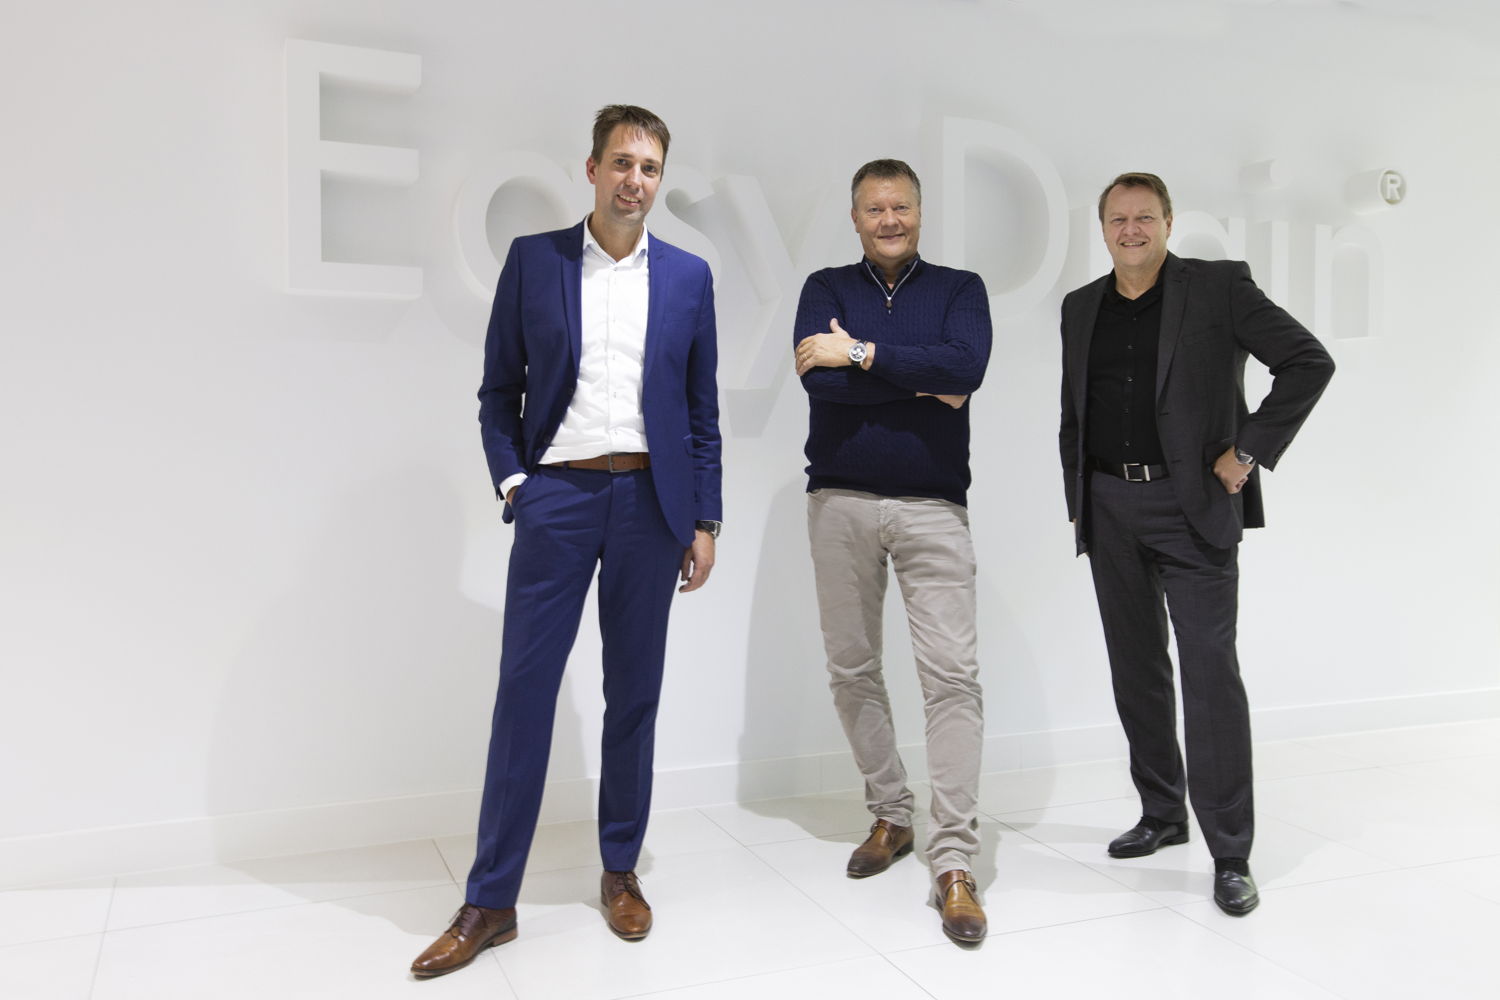  Erik Grootenhuis, Managing Director, Eric and Juergen Keizers, founders and CEOs of ESS (from left to right)